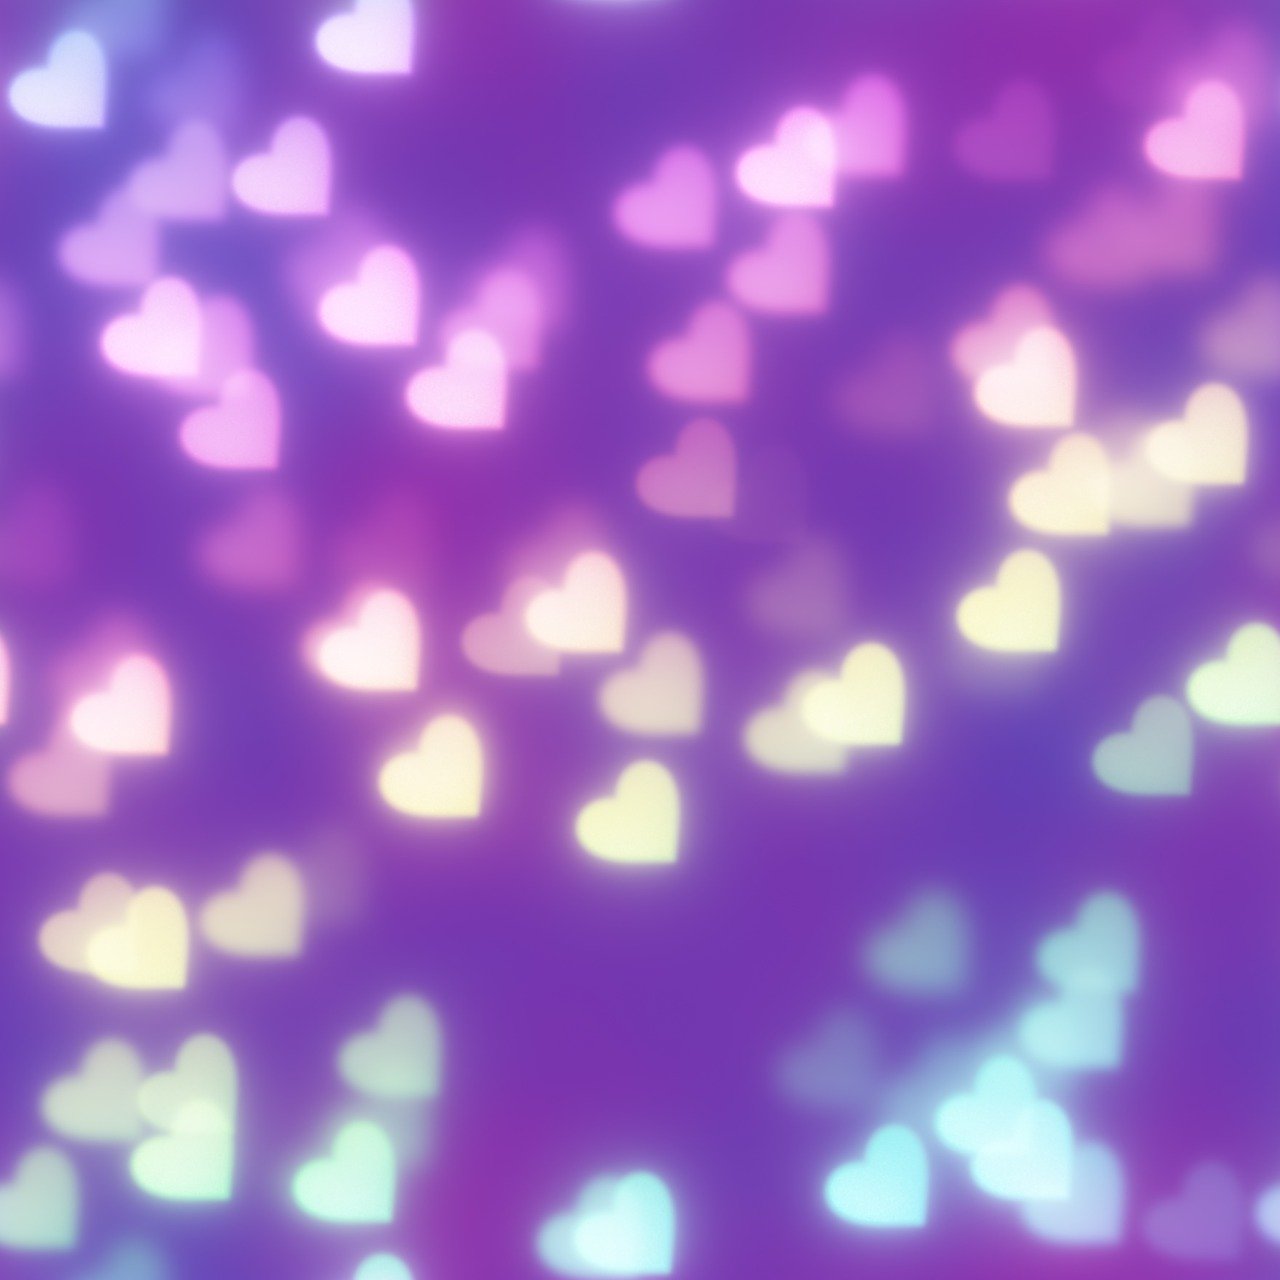 a blurry image of a bunch of hearts, a picture, tumblr, computer art, opalescent night background, blurred and dreamy illustration